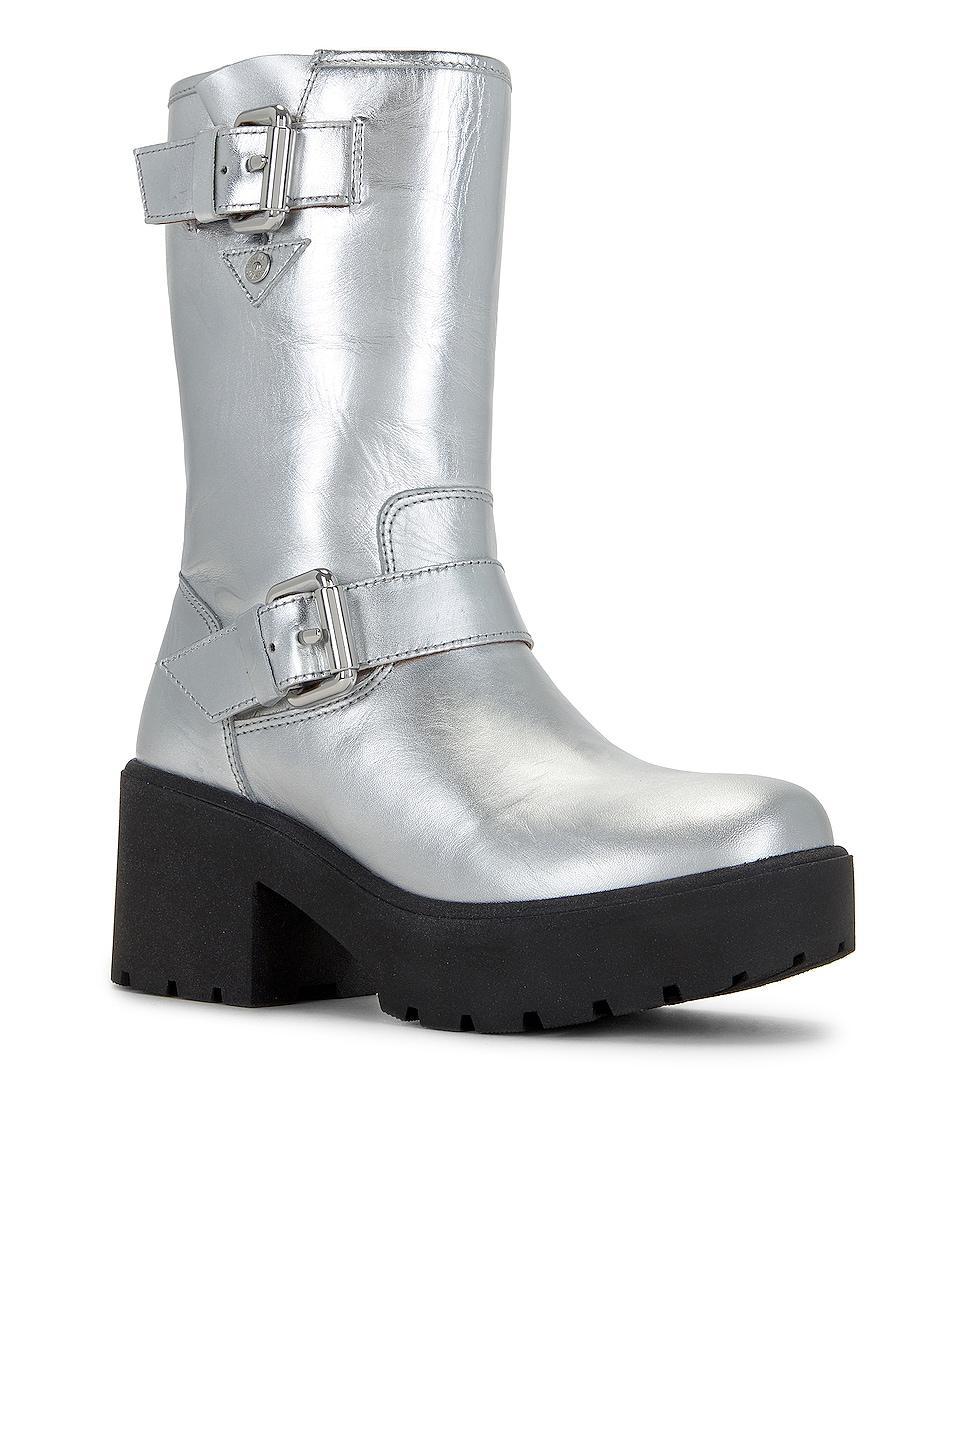 Moschino Jeans Soft Leather Boot in Metallic Silver Product Image